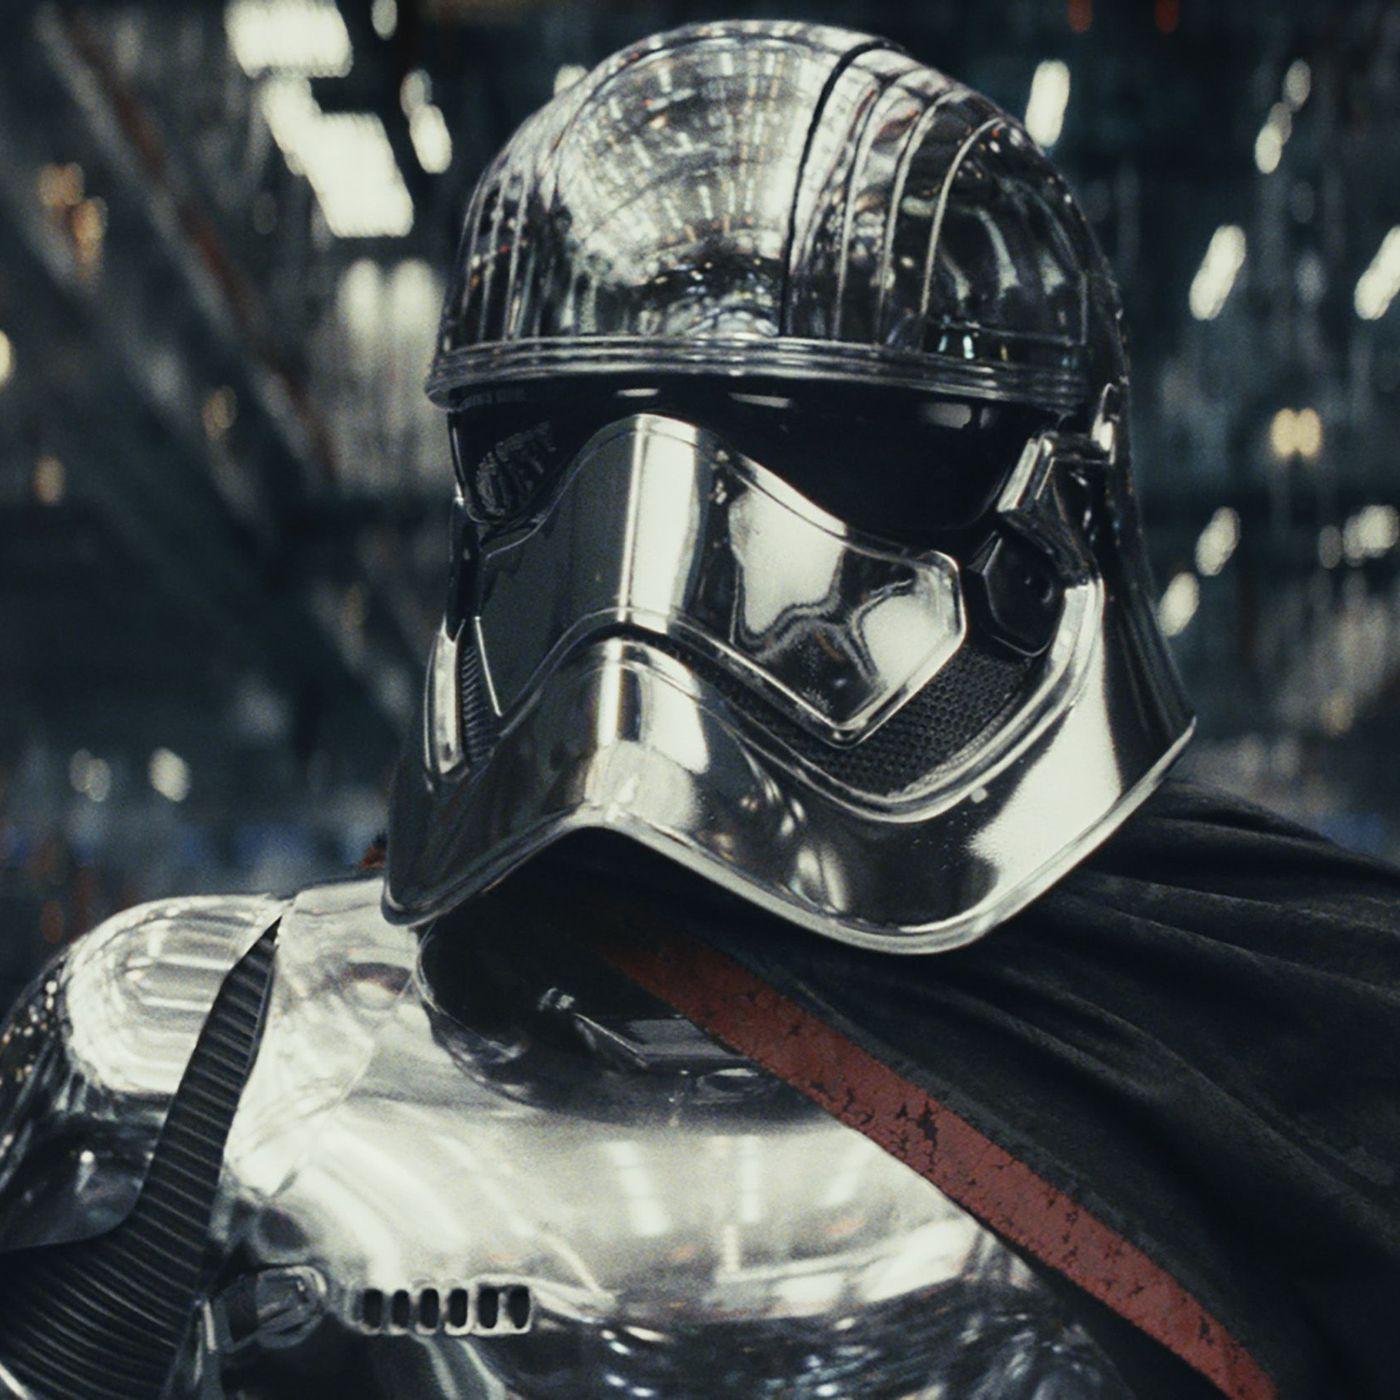 Phasma's deleted scene from Star Wars: The Last Jedi is